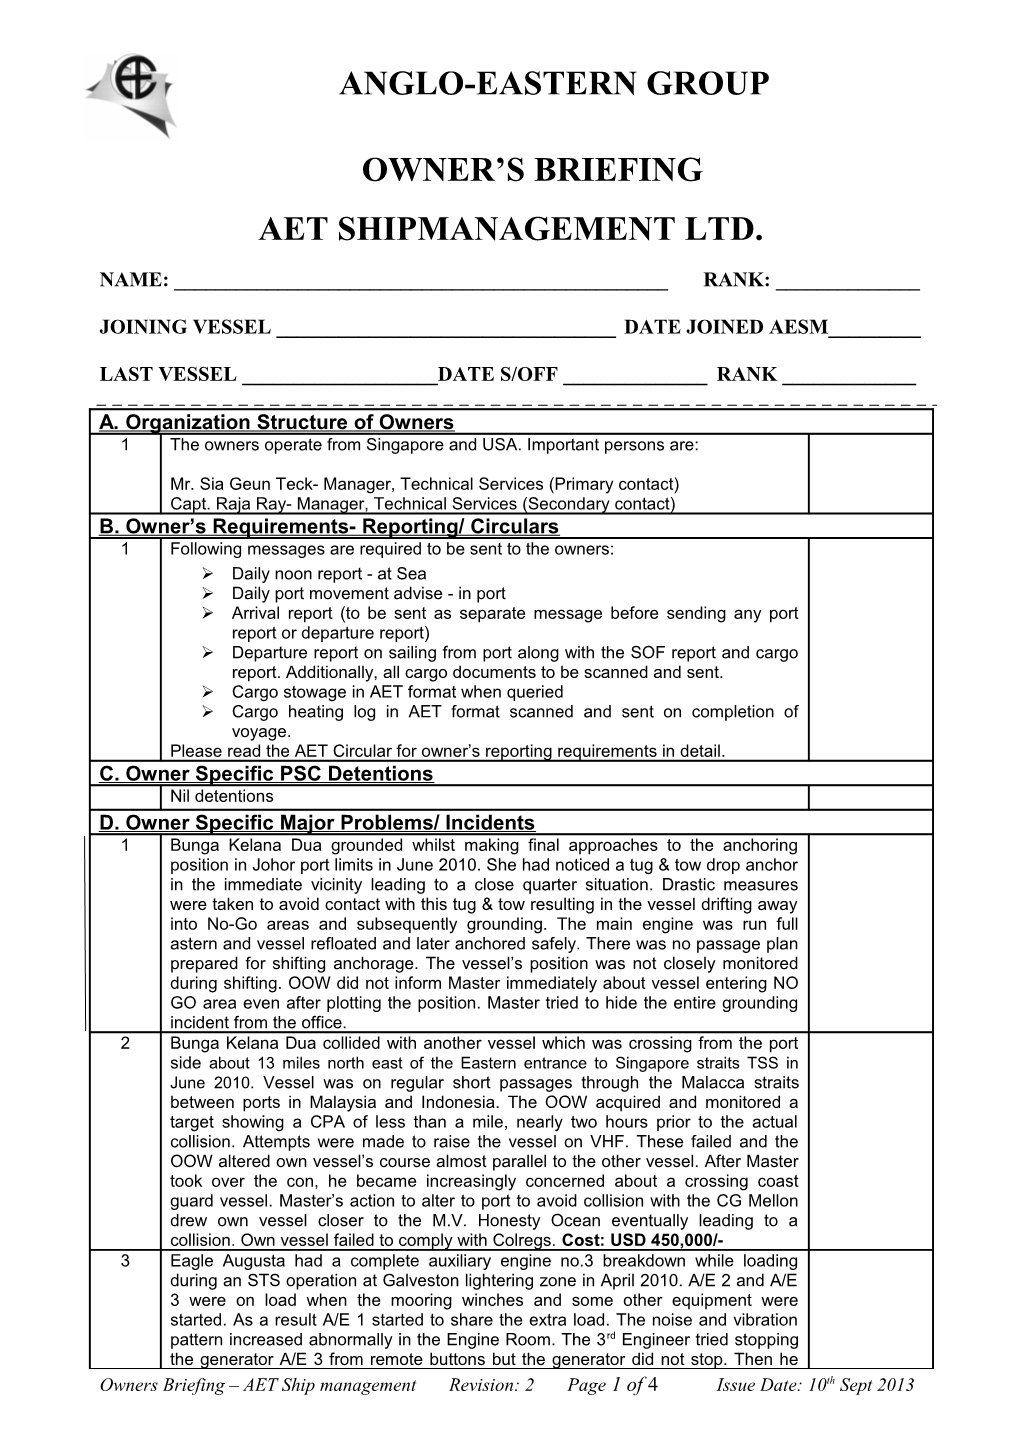 Owners Briefing- AET Ship Management